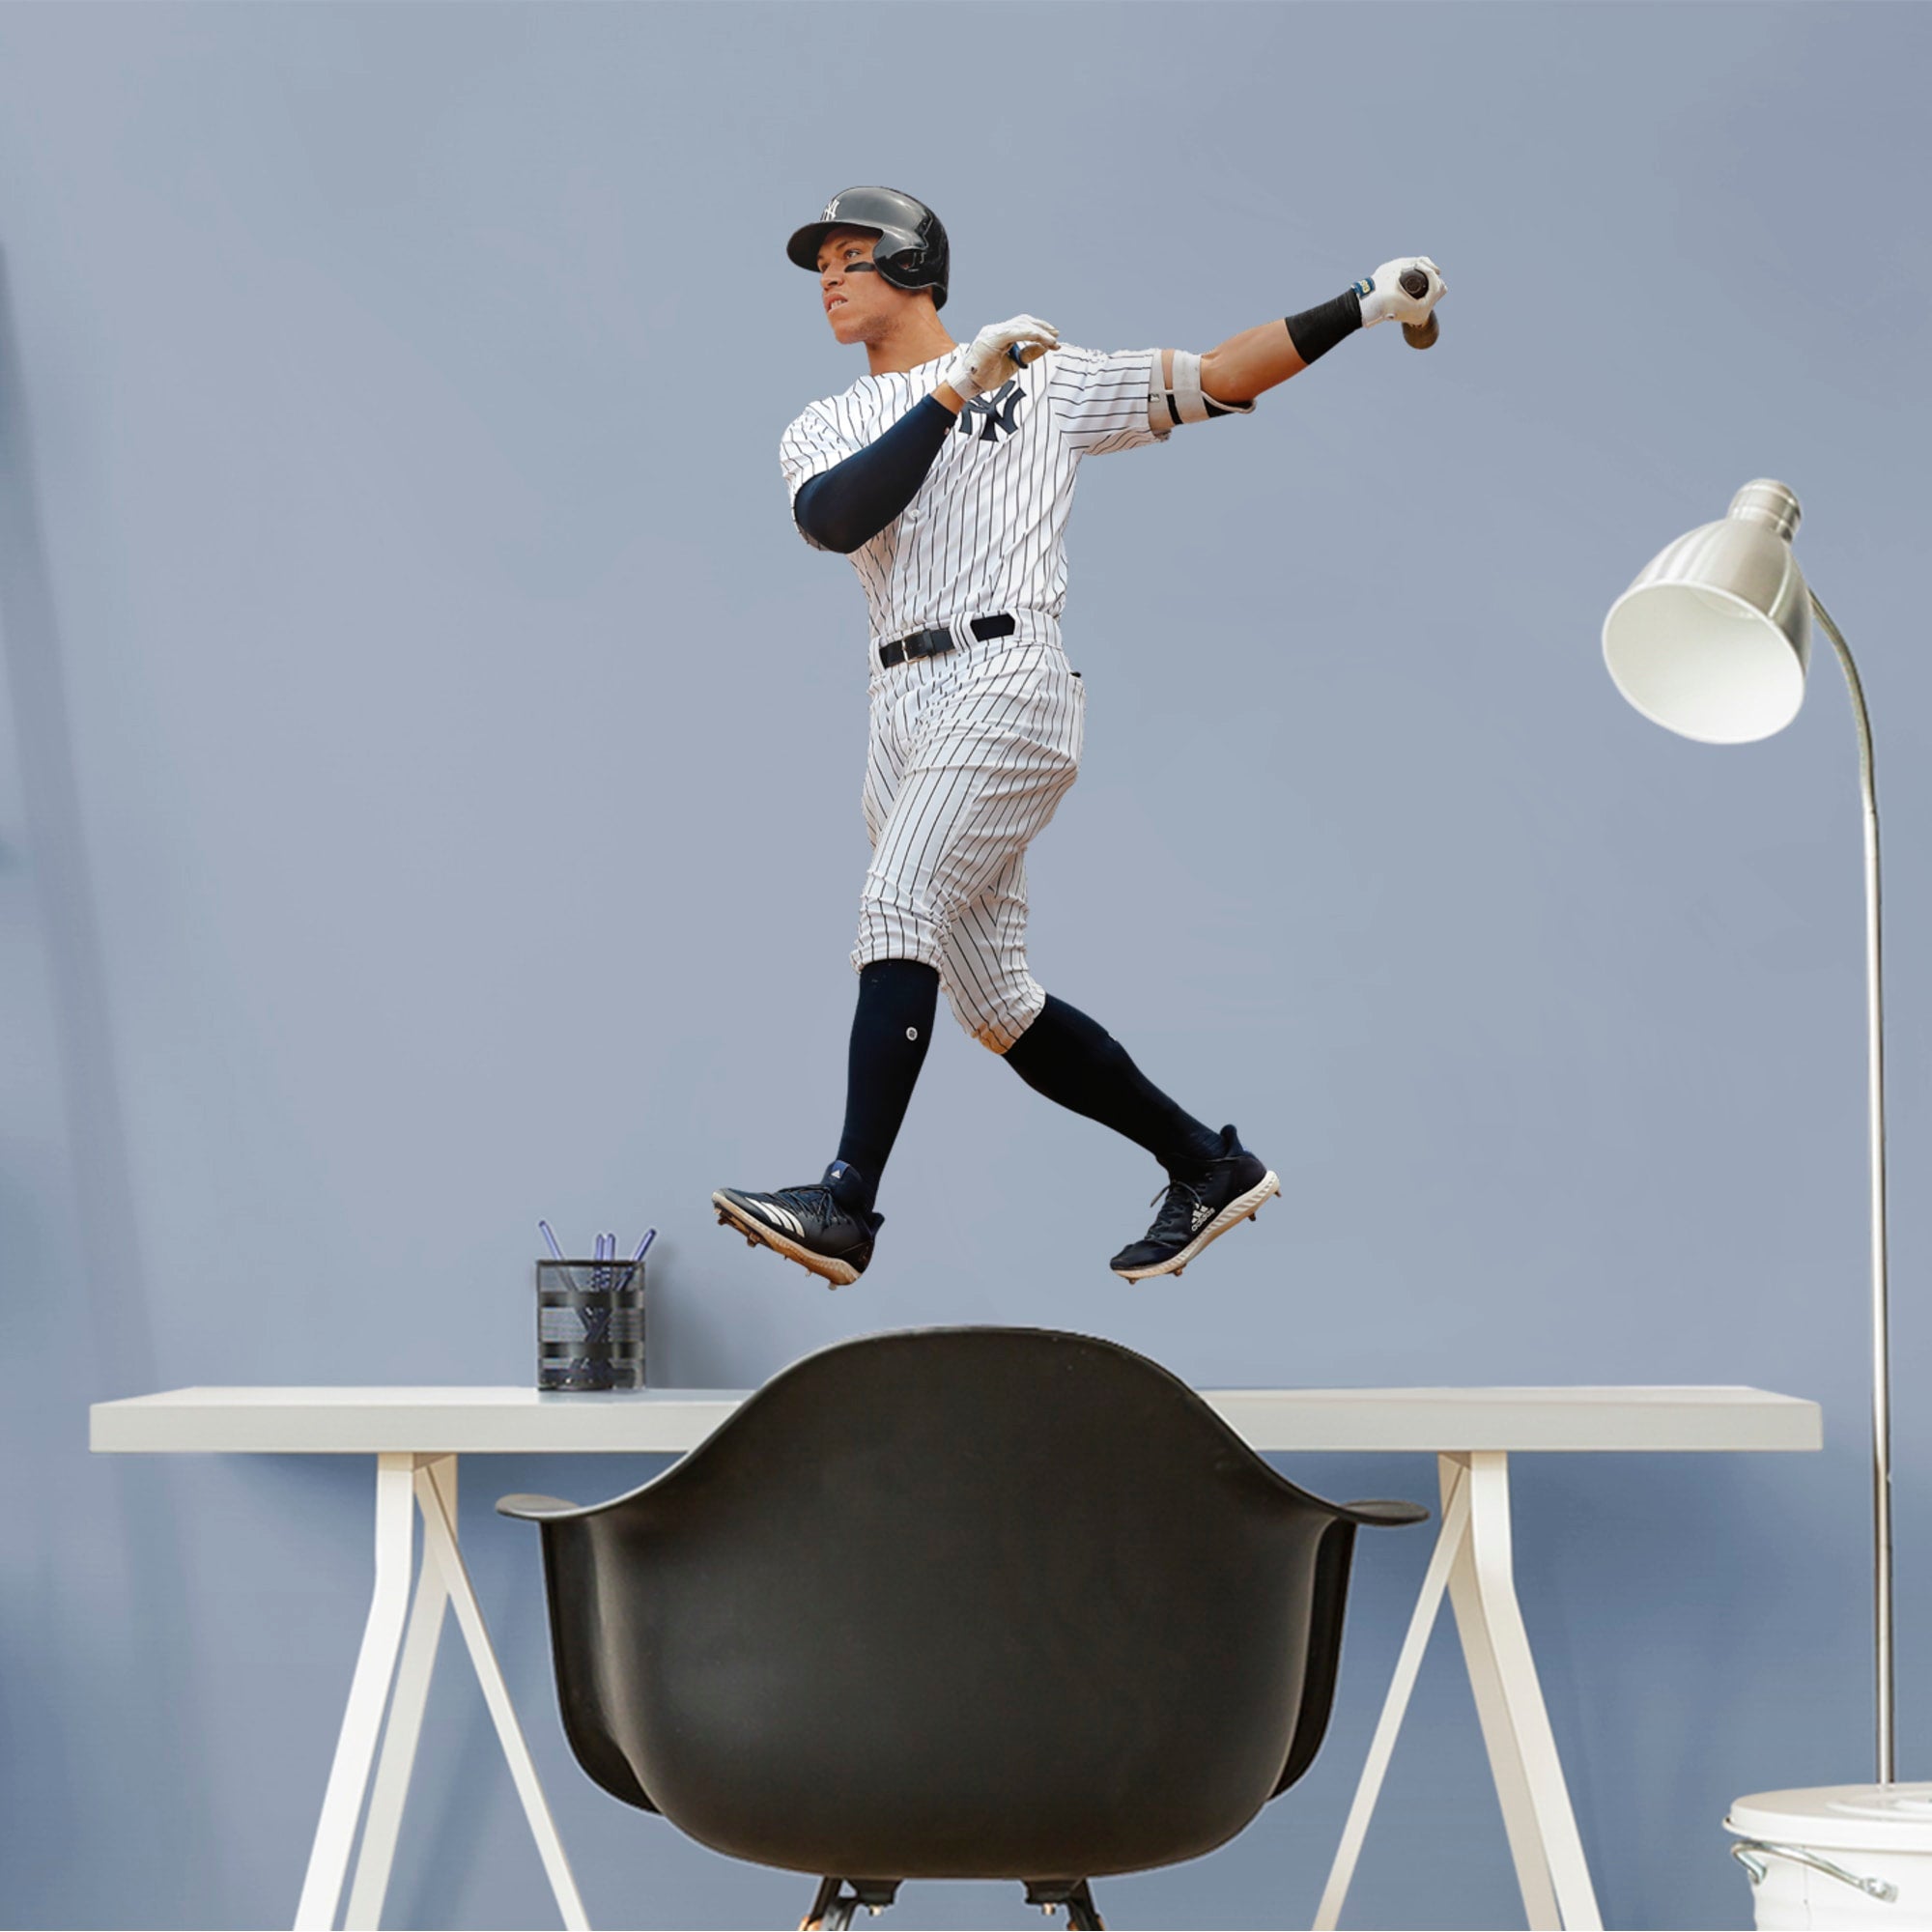 Aaron Judge for New York Yankees - Officially Licensed MLB Removable Wall Decal 25.0"W x 38.0"H by Fathead | Vinyl